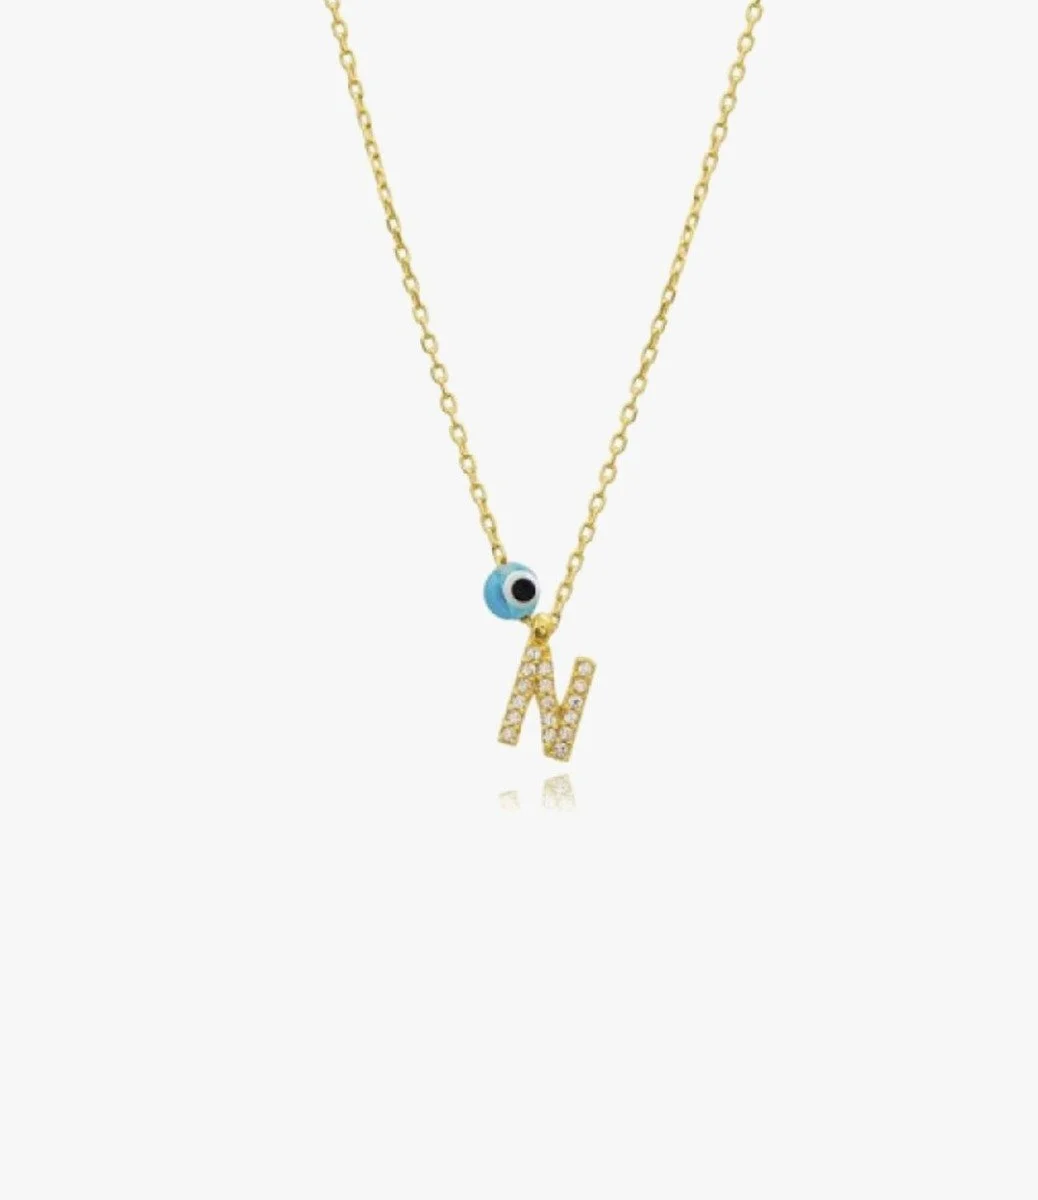 Golden Necklace With Letter N and Blue Bead by Nafees